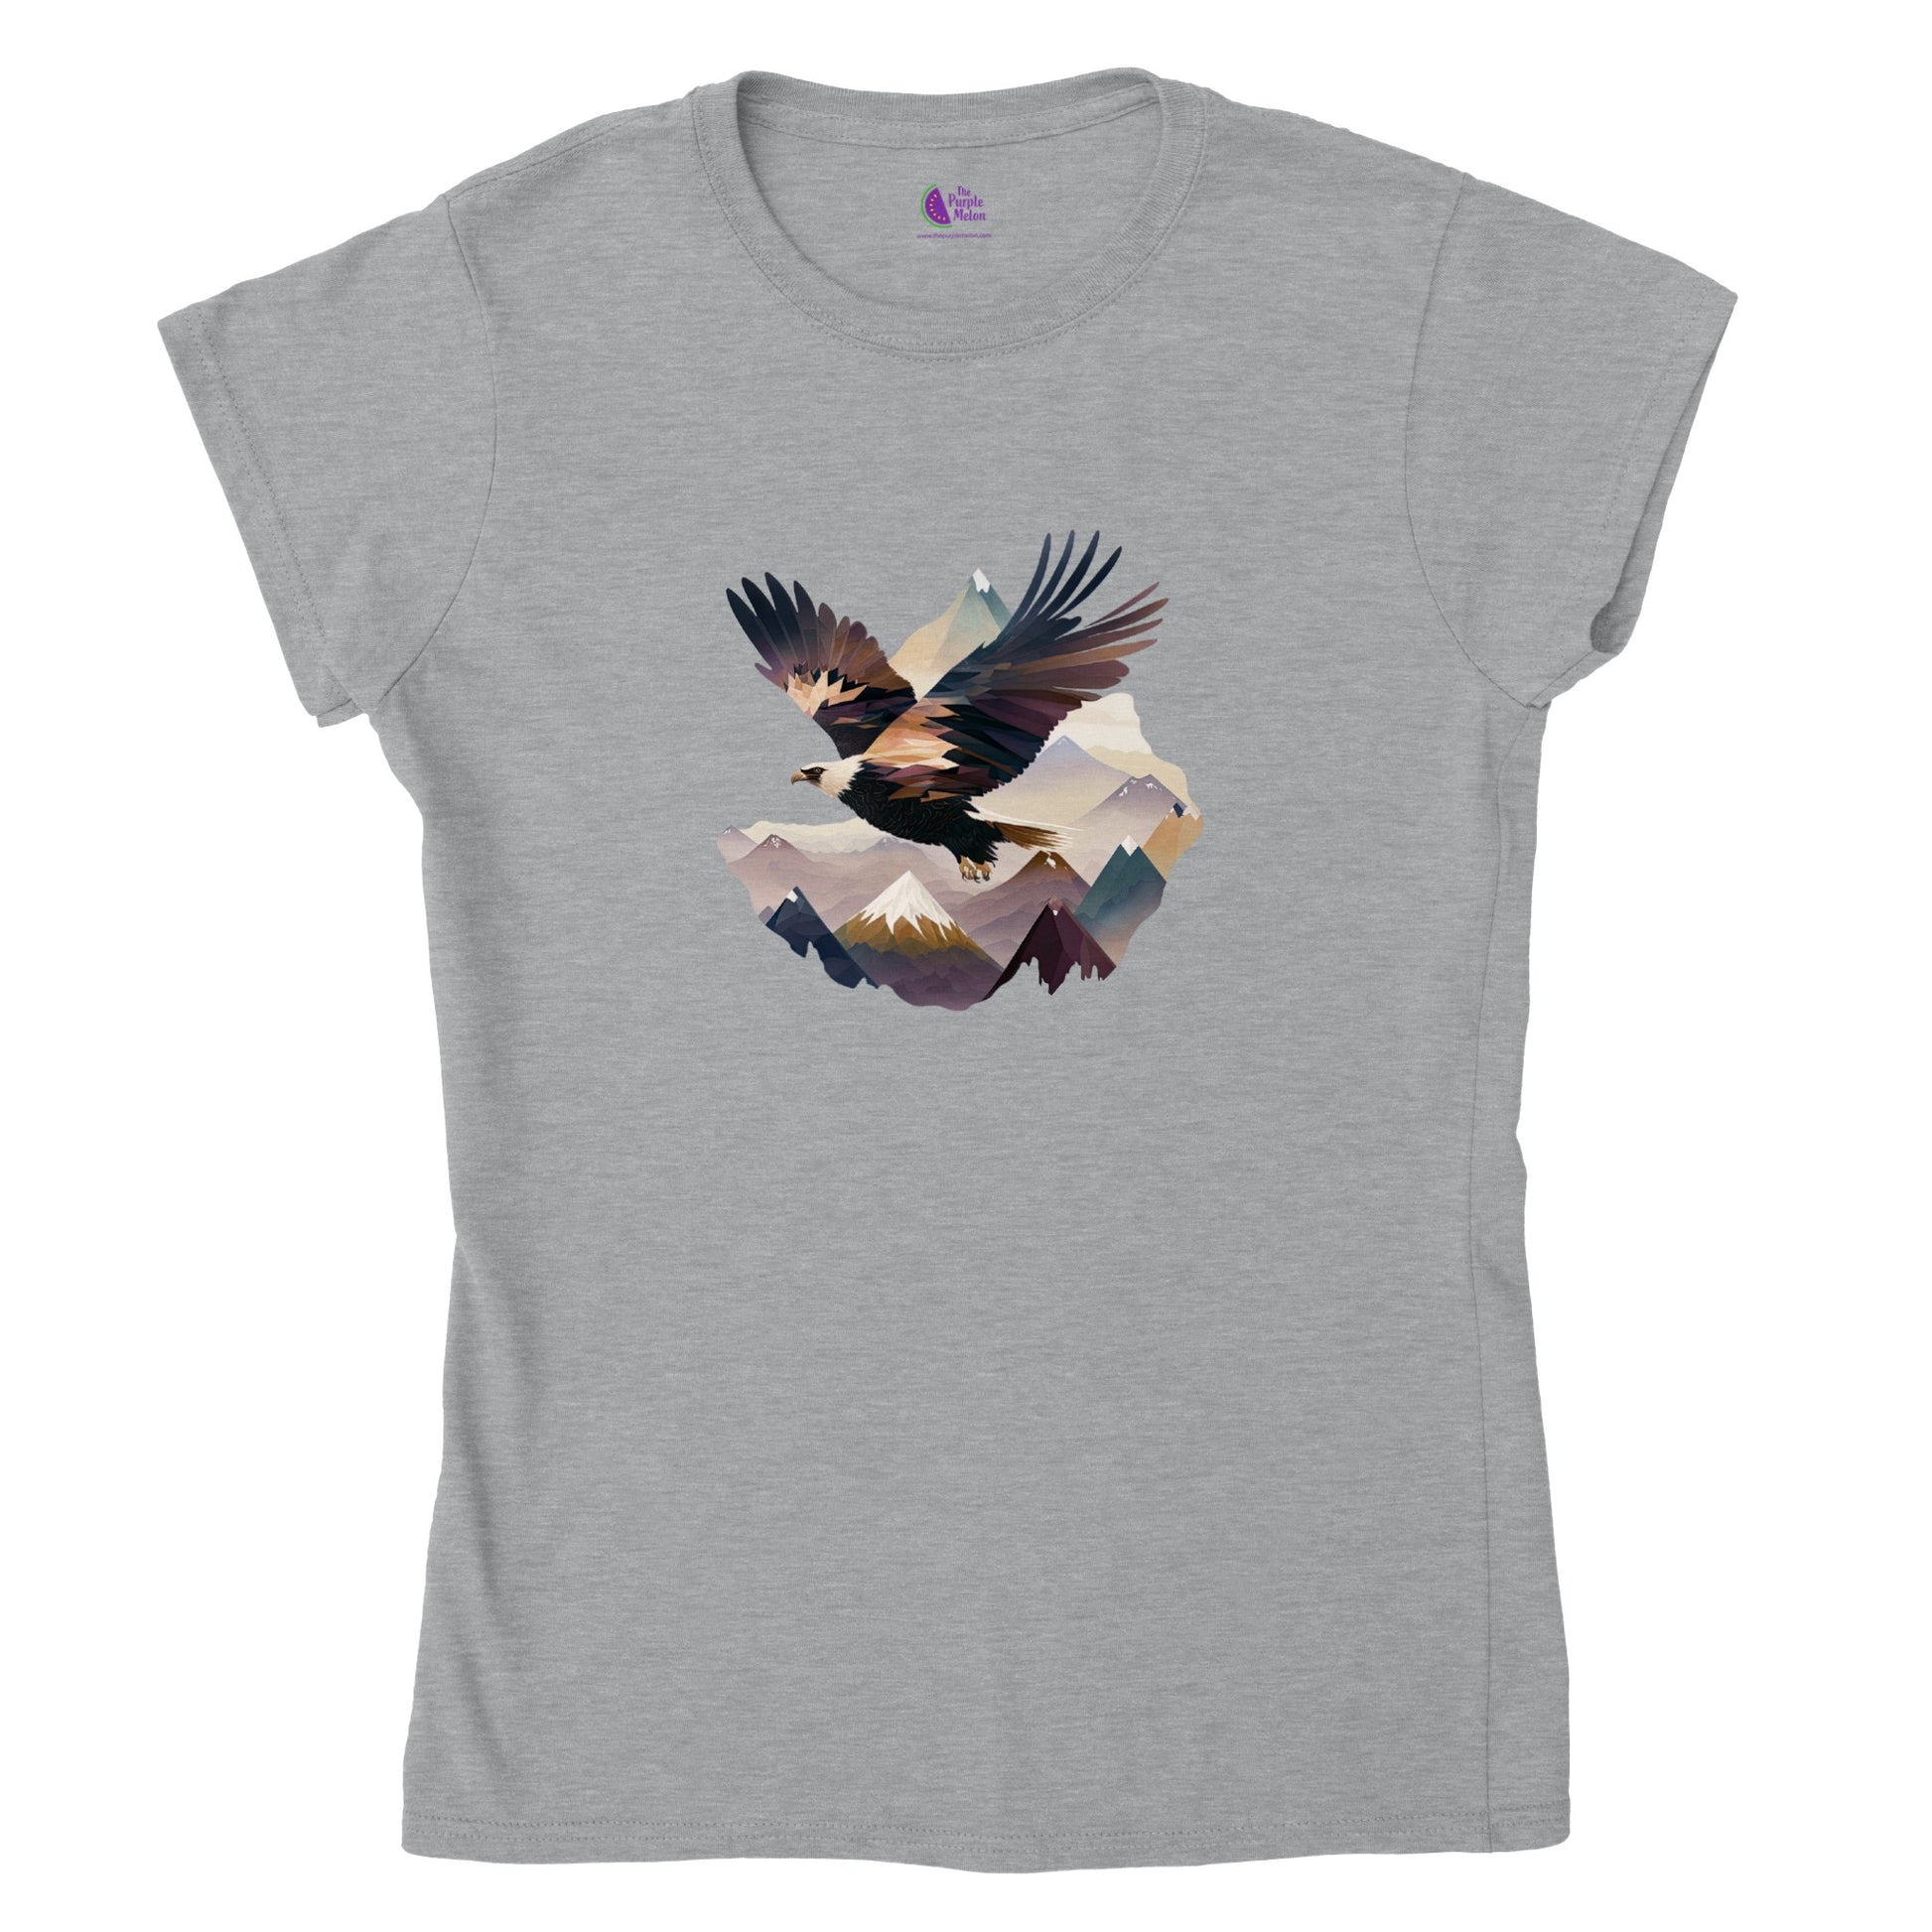 Grey t-shirt with an eagle flying over a mountain range print